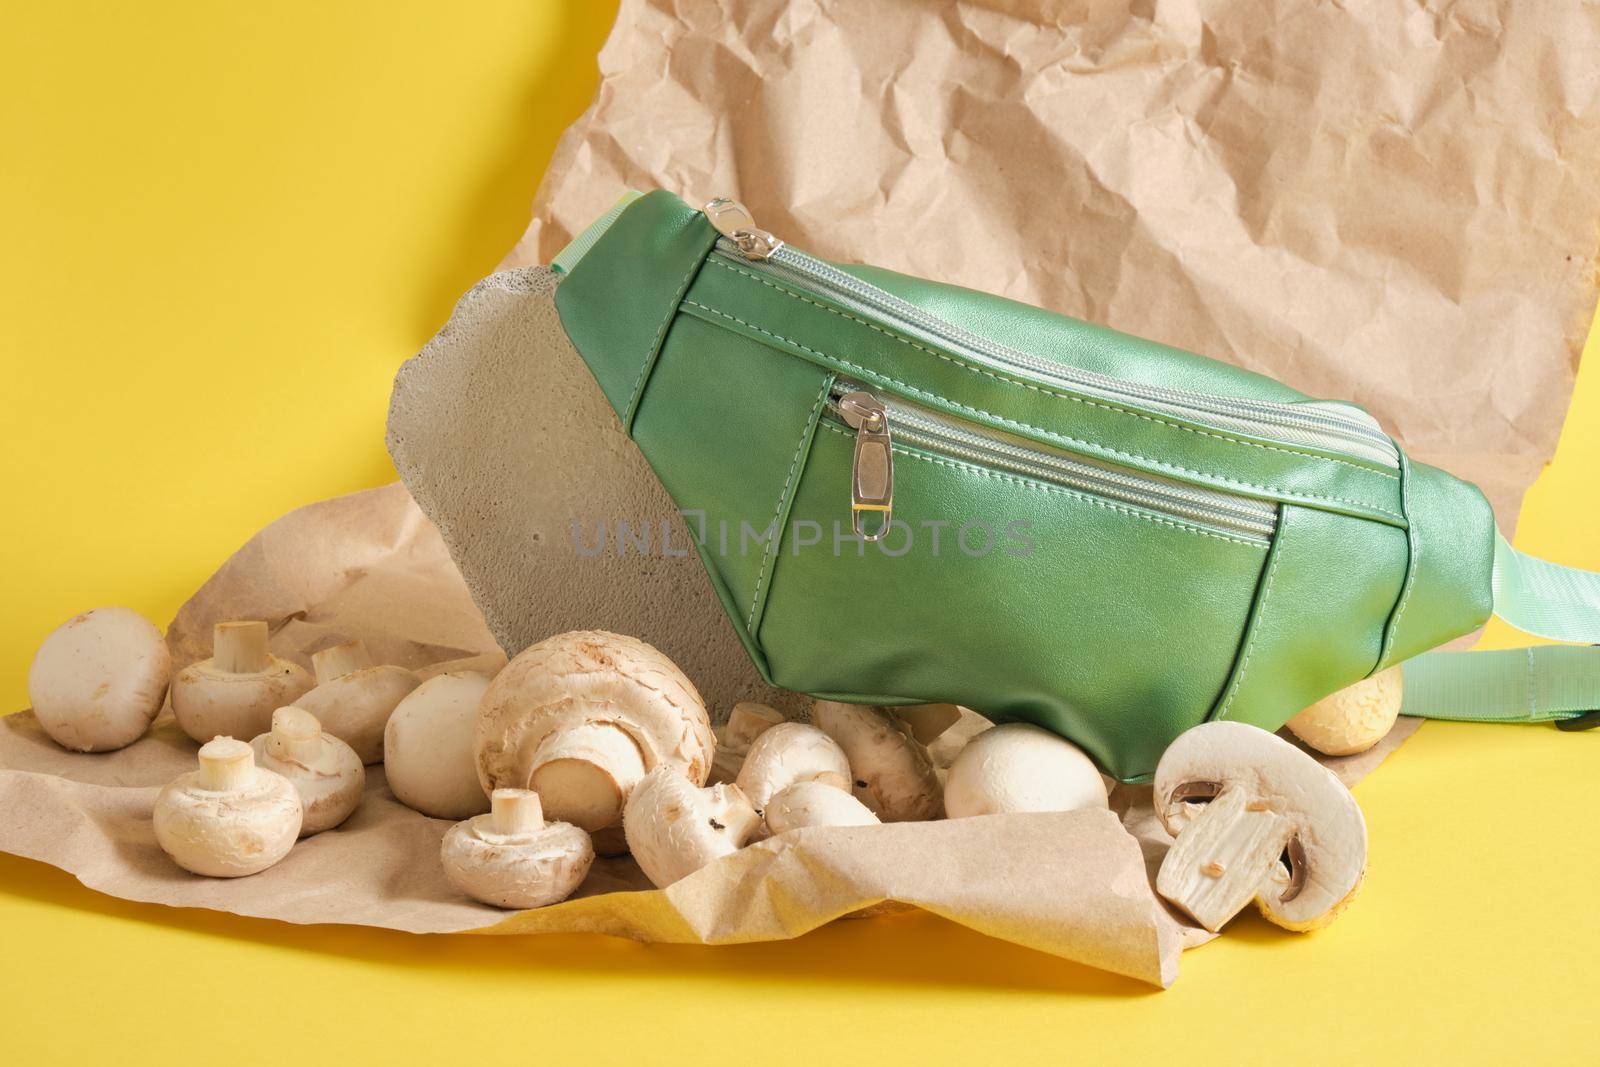 green belt bag made of ecoleather and champignons on yellow background, vegan leather from mushroom mycelium concept, environmental protection and animals